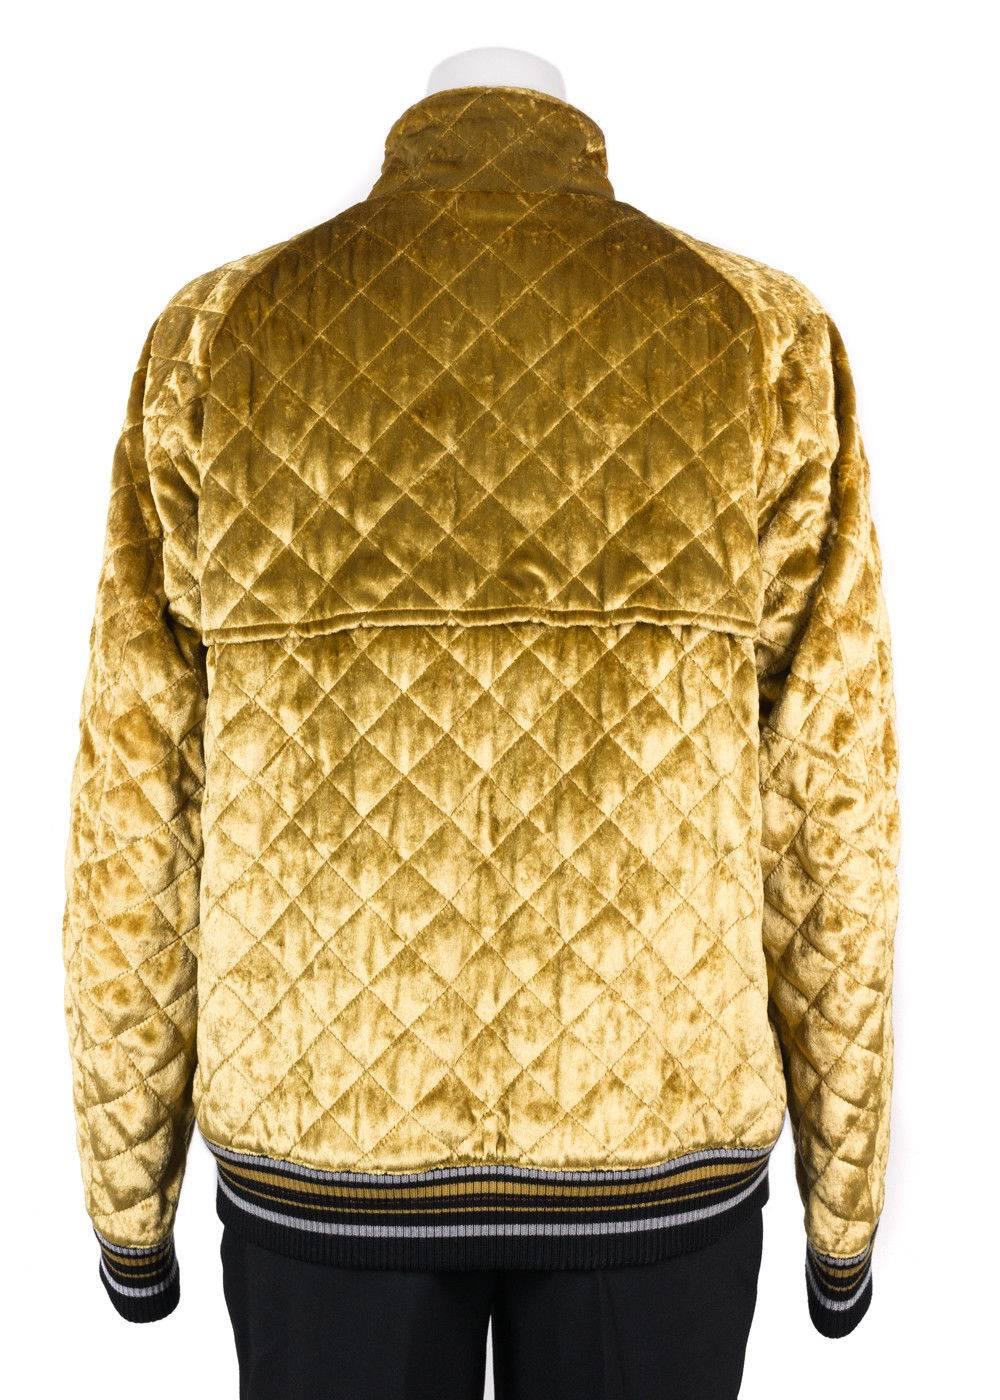 Brand New Maison Margiela Quilted Bomber Jacket
Original Tags & Hanger Included
Retails in Stores & Online for $2795
Size IT44 / US8 
*Please refer to Maison Margiela's size chart*

Make a style statement in this vibrant velvet quilted bomber jacket